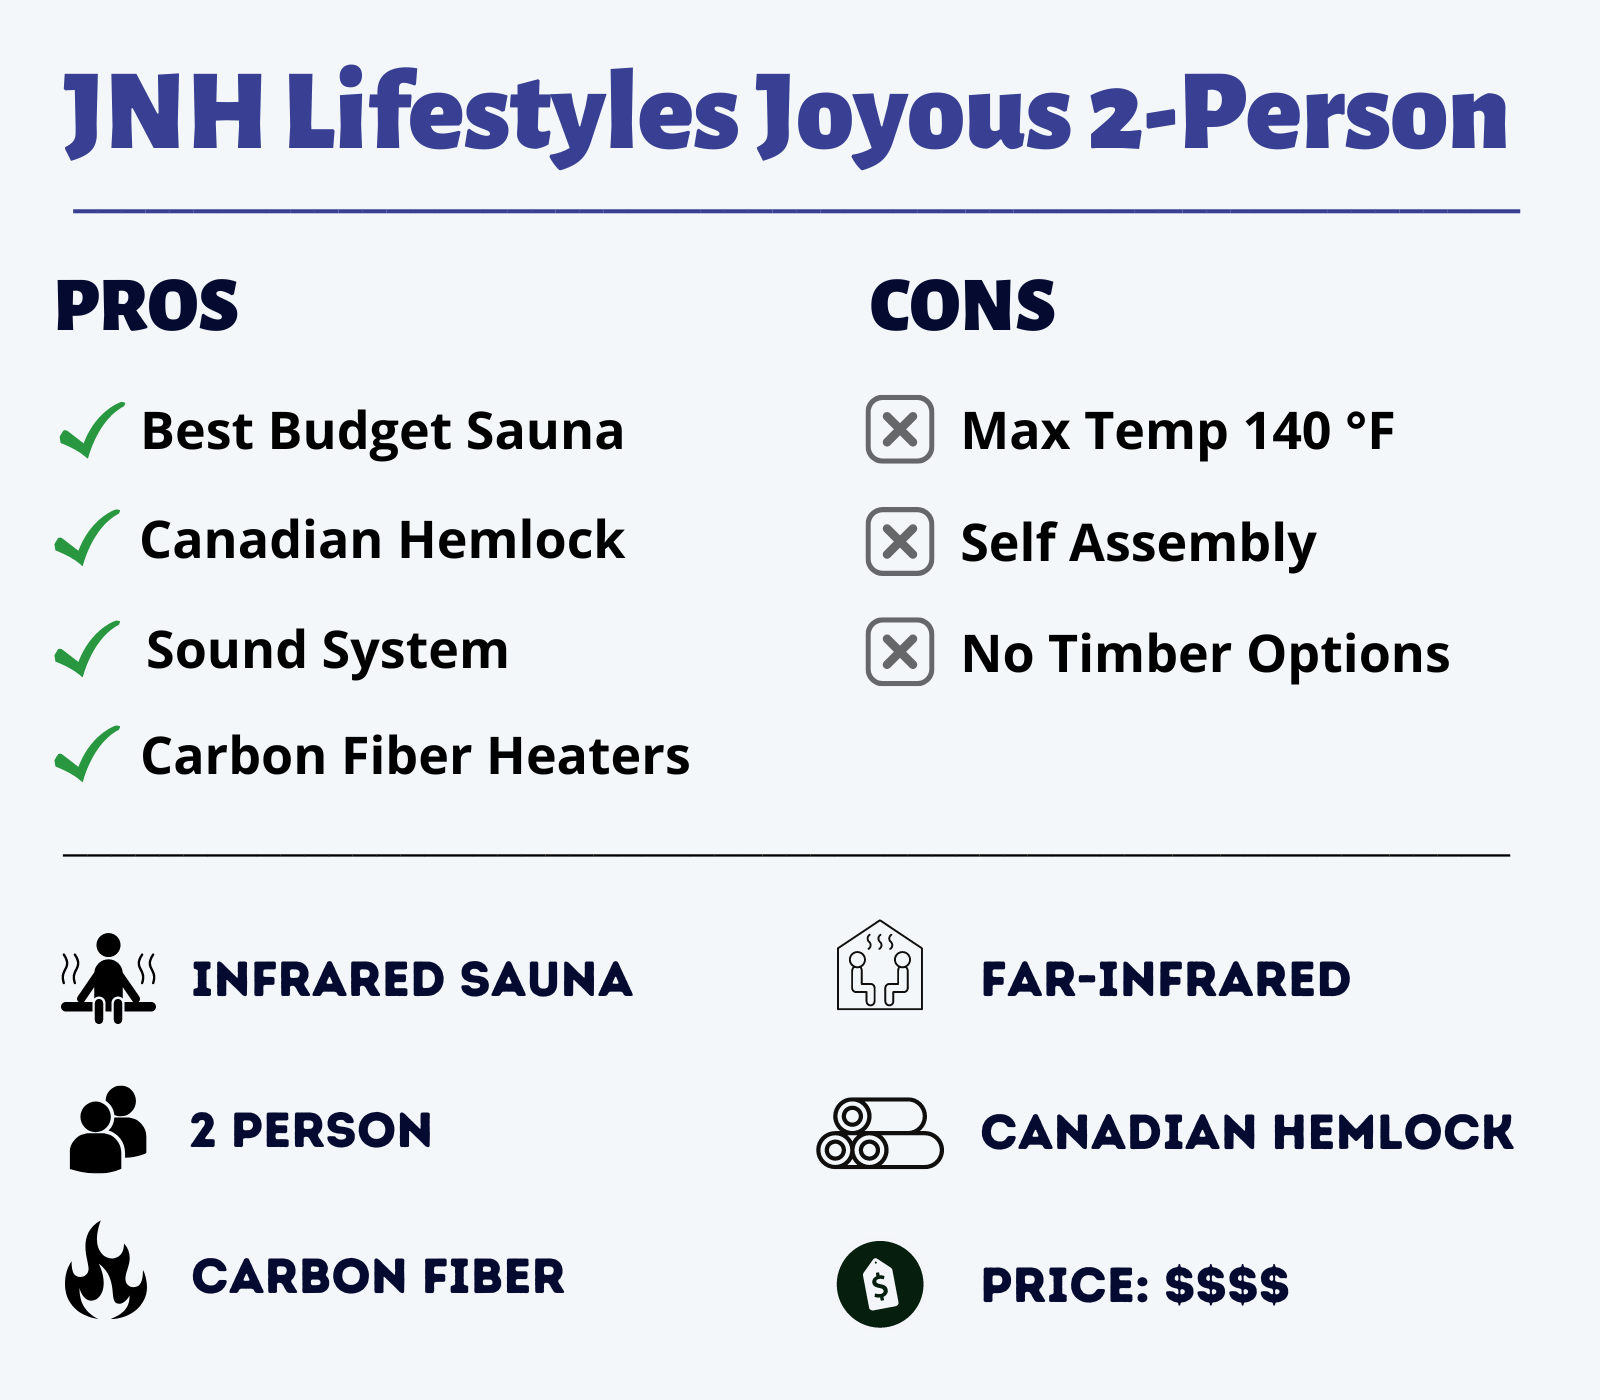 JNH Lifestyles Joyous Infrared Sauna Key Features Pros and Cons